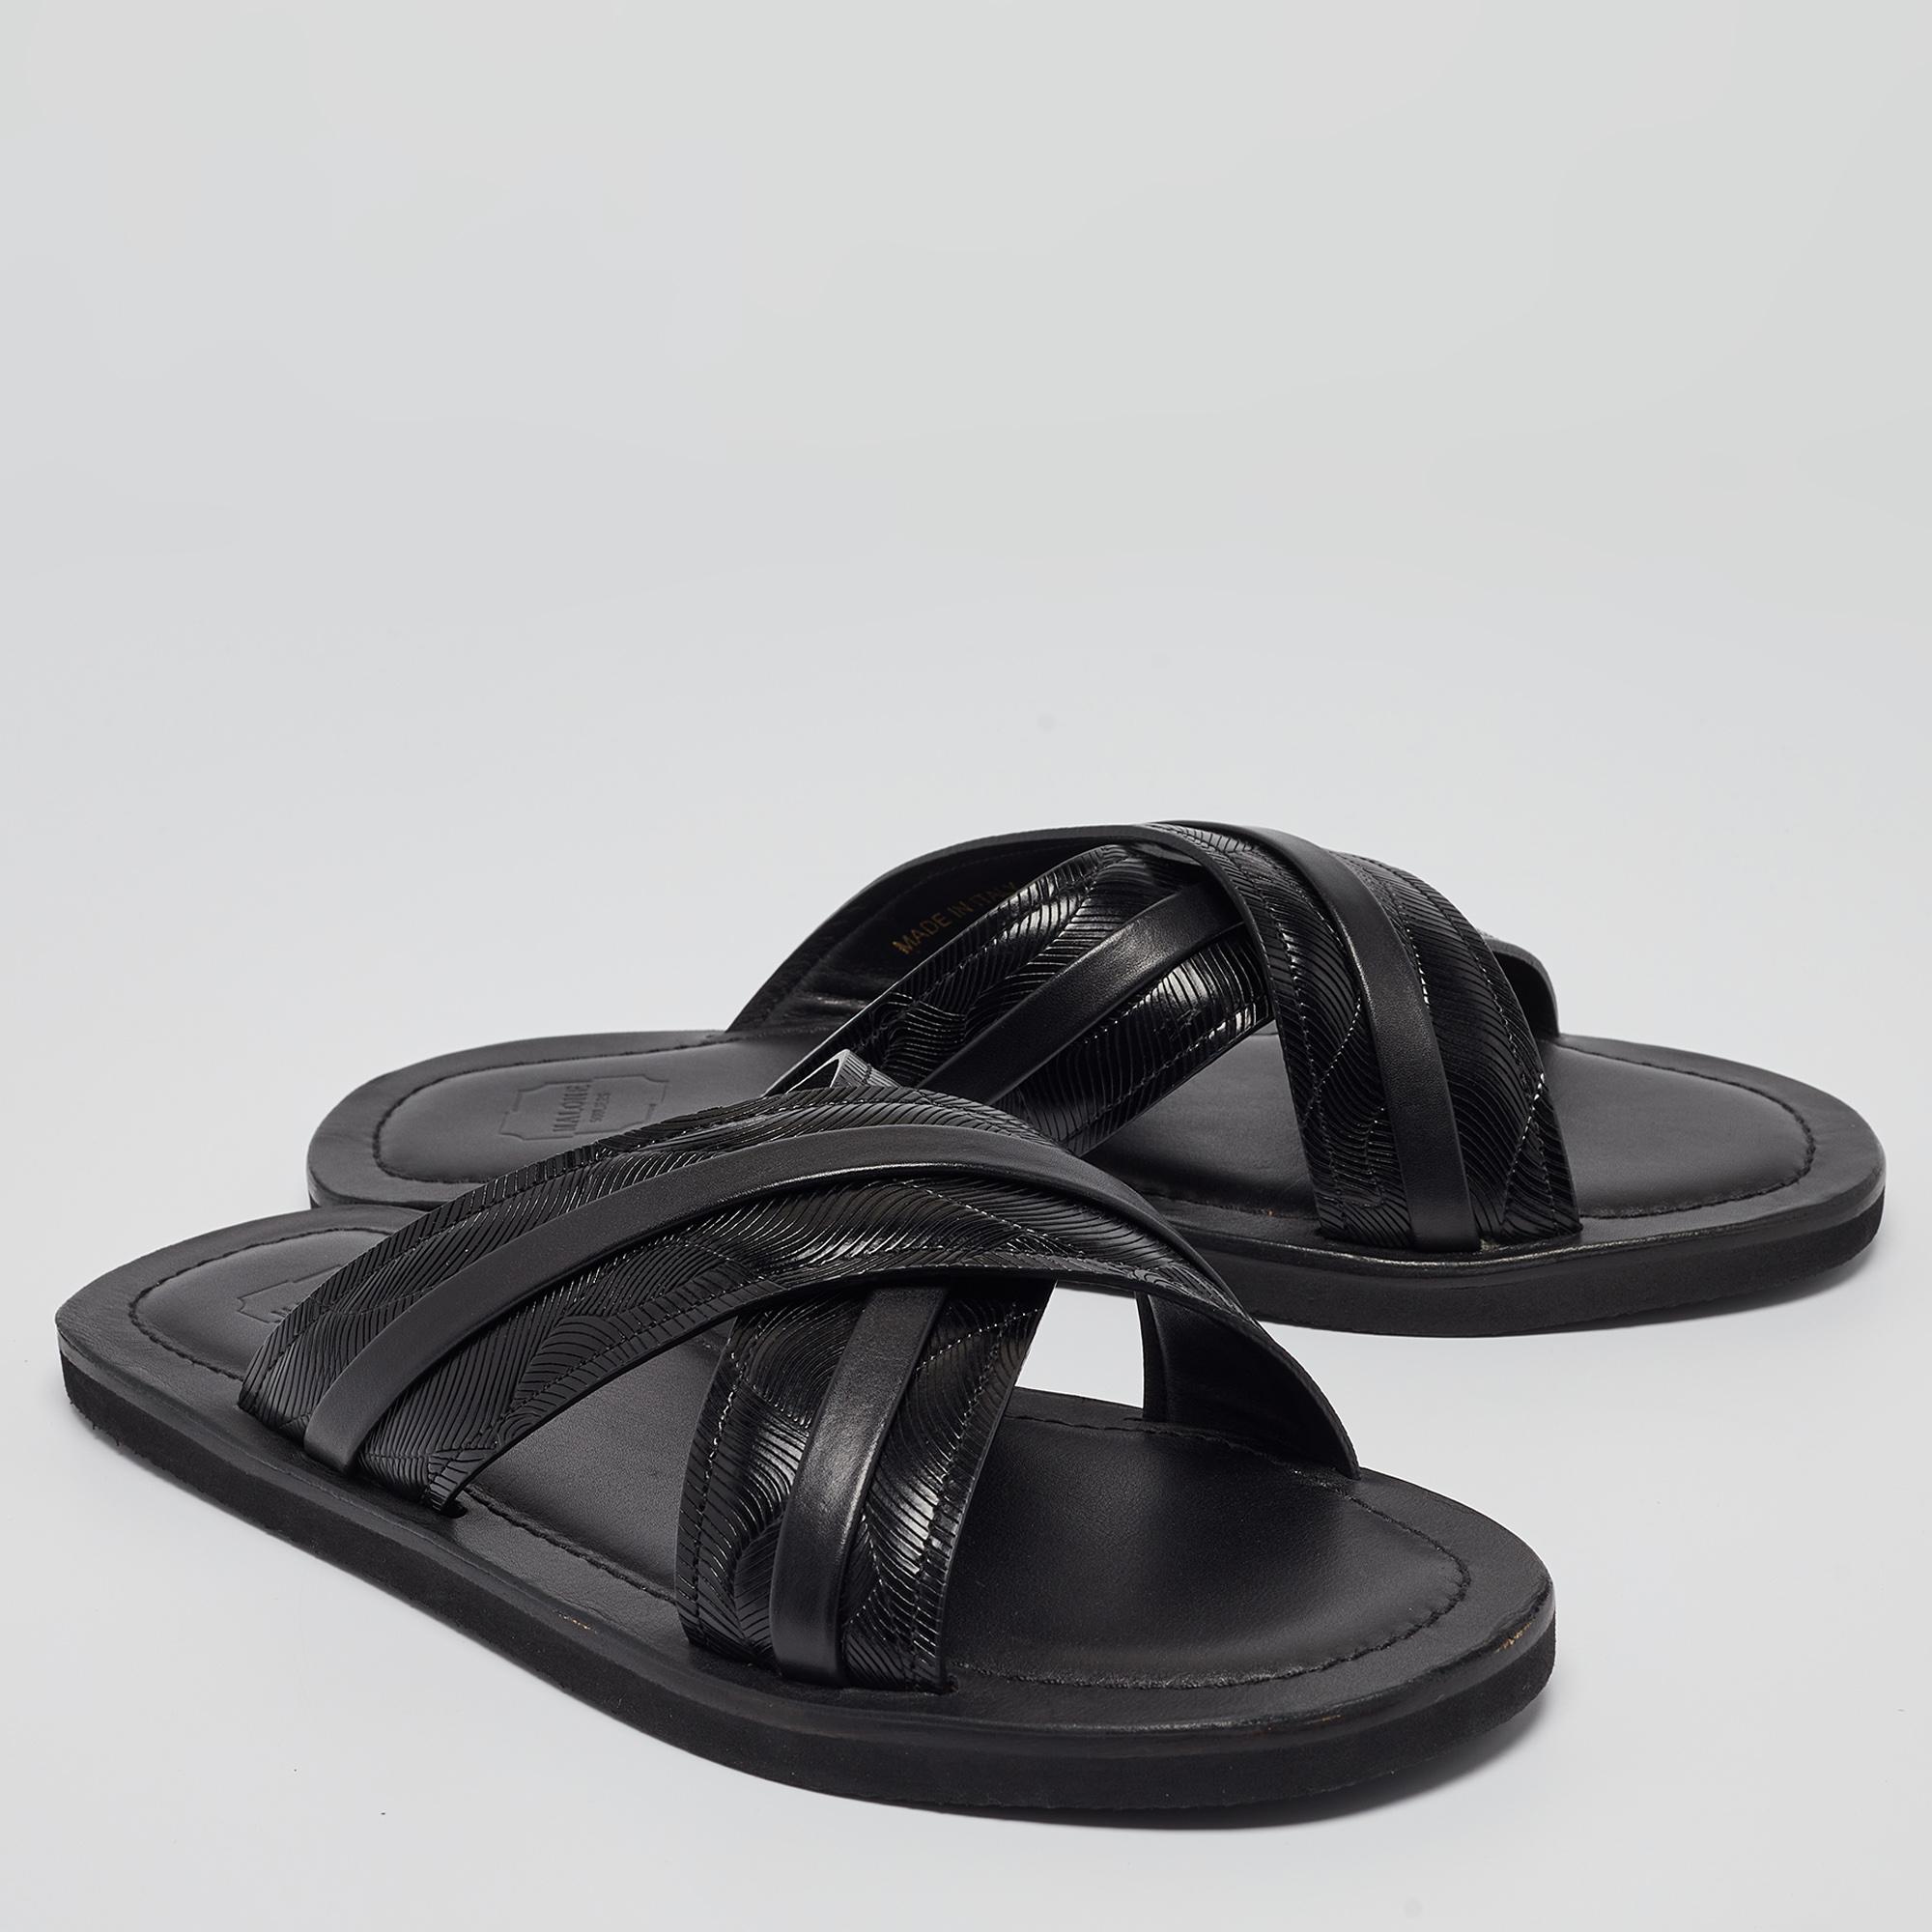 Malone Souliers Black Textured Leather Slides Size 43 For Sale 3